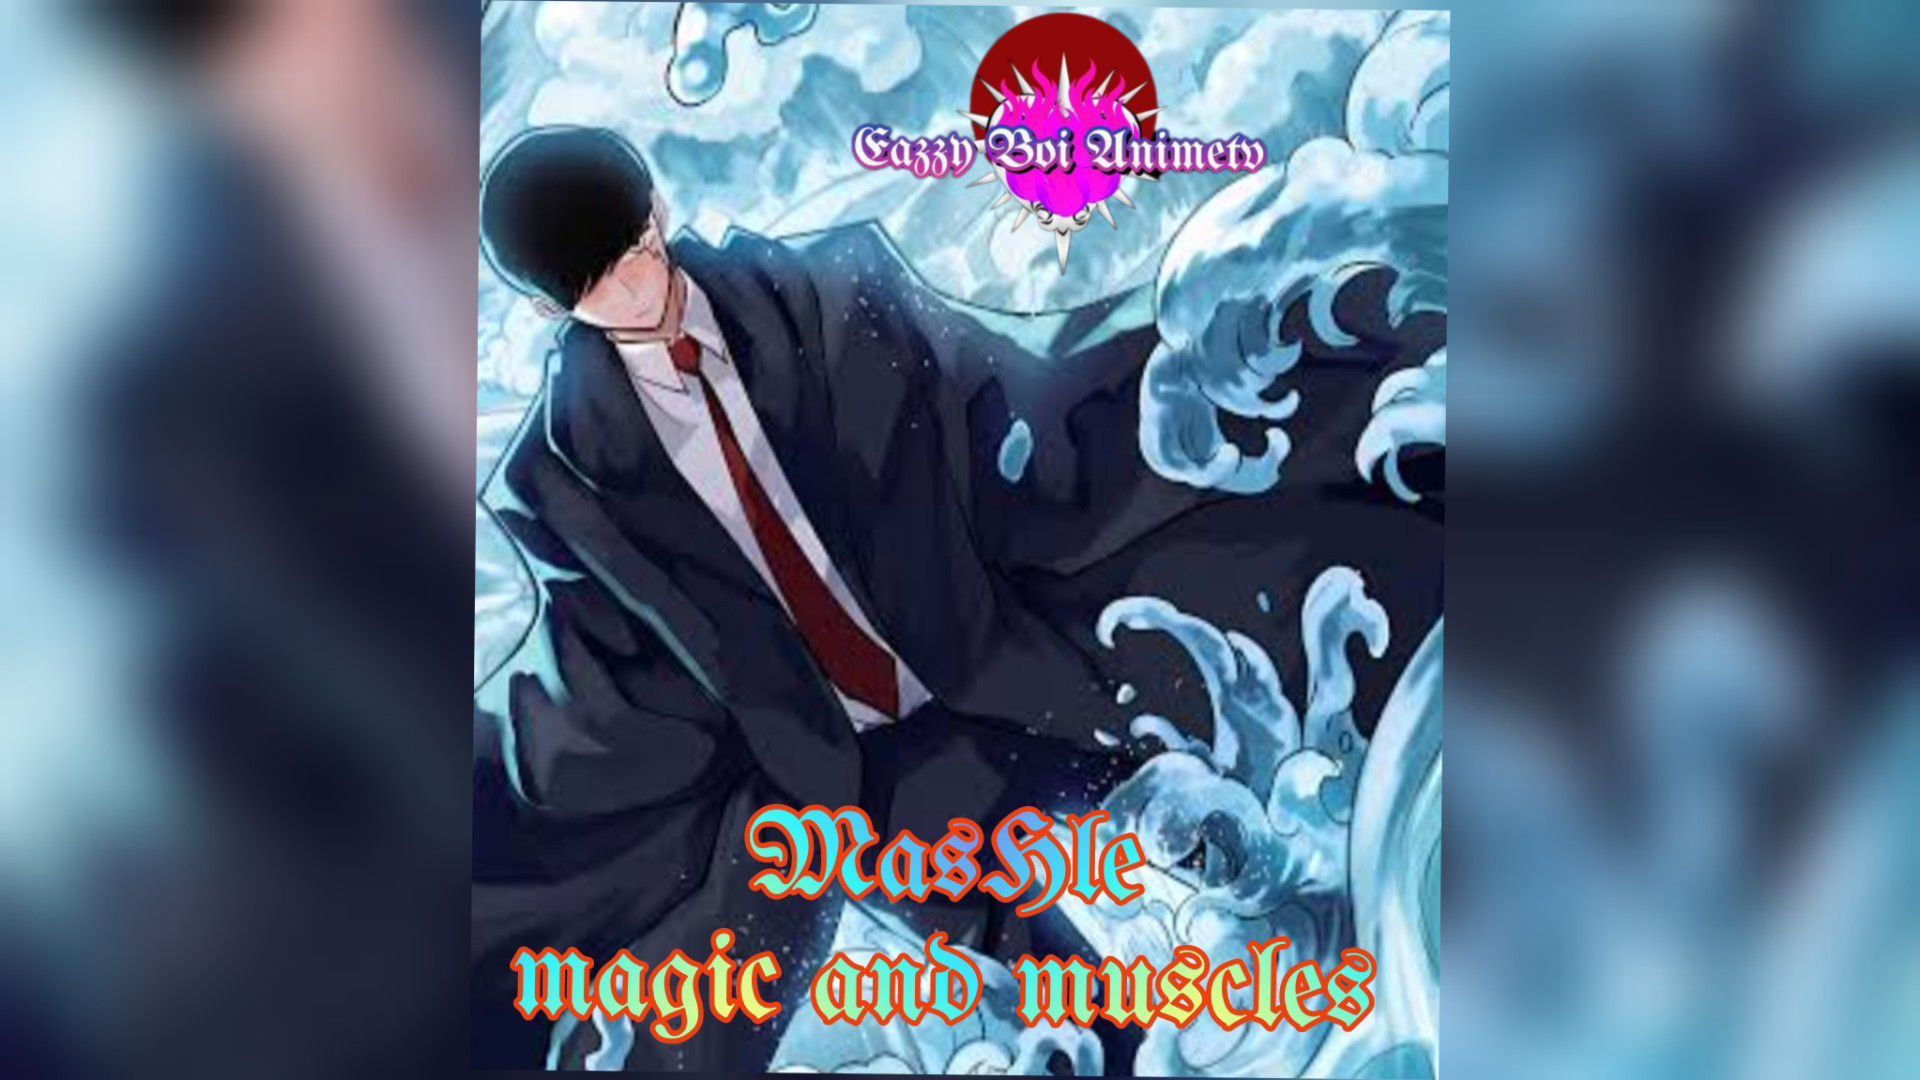 THIS ANIME IS GOING TO BE GOOD  Mashle: Magic and Muscles Episode 1  Reaction 